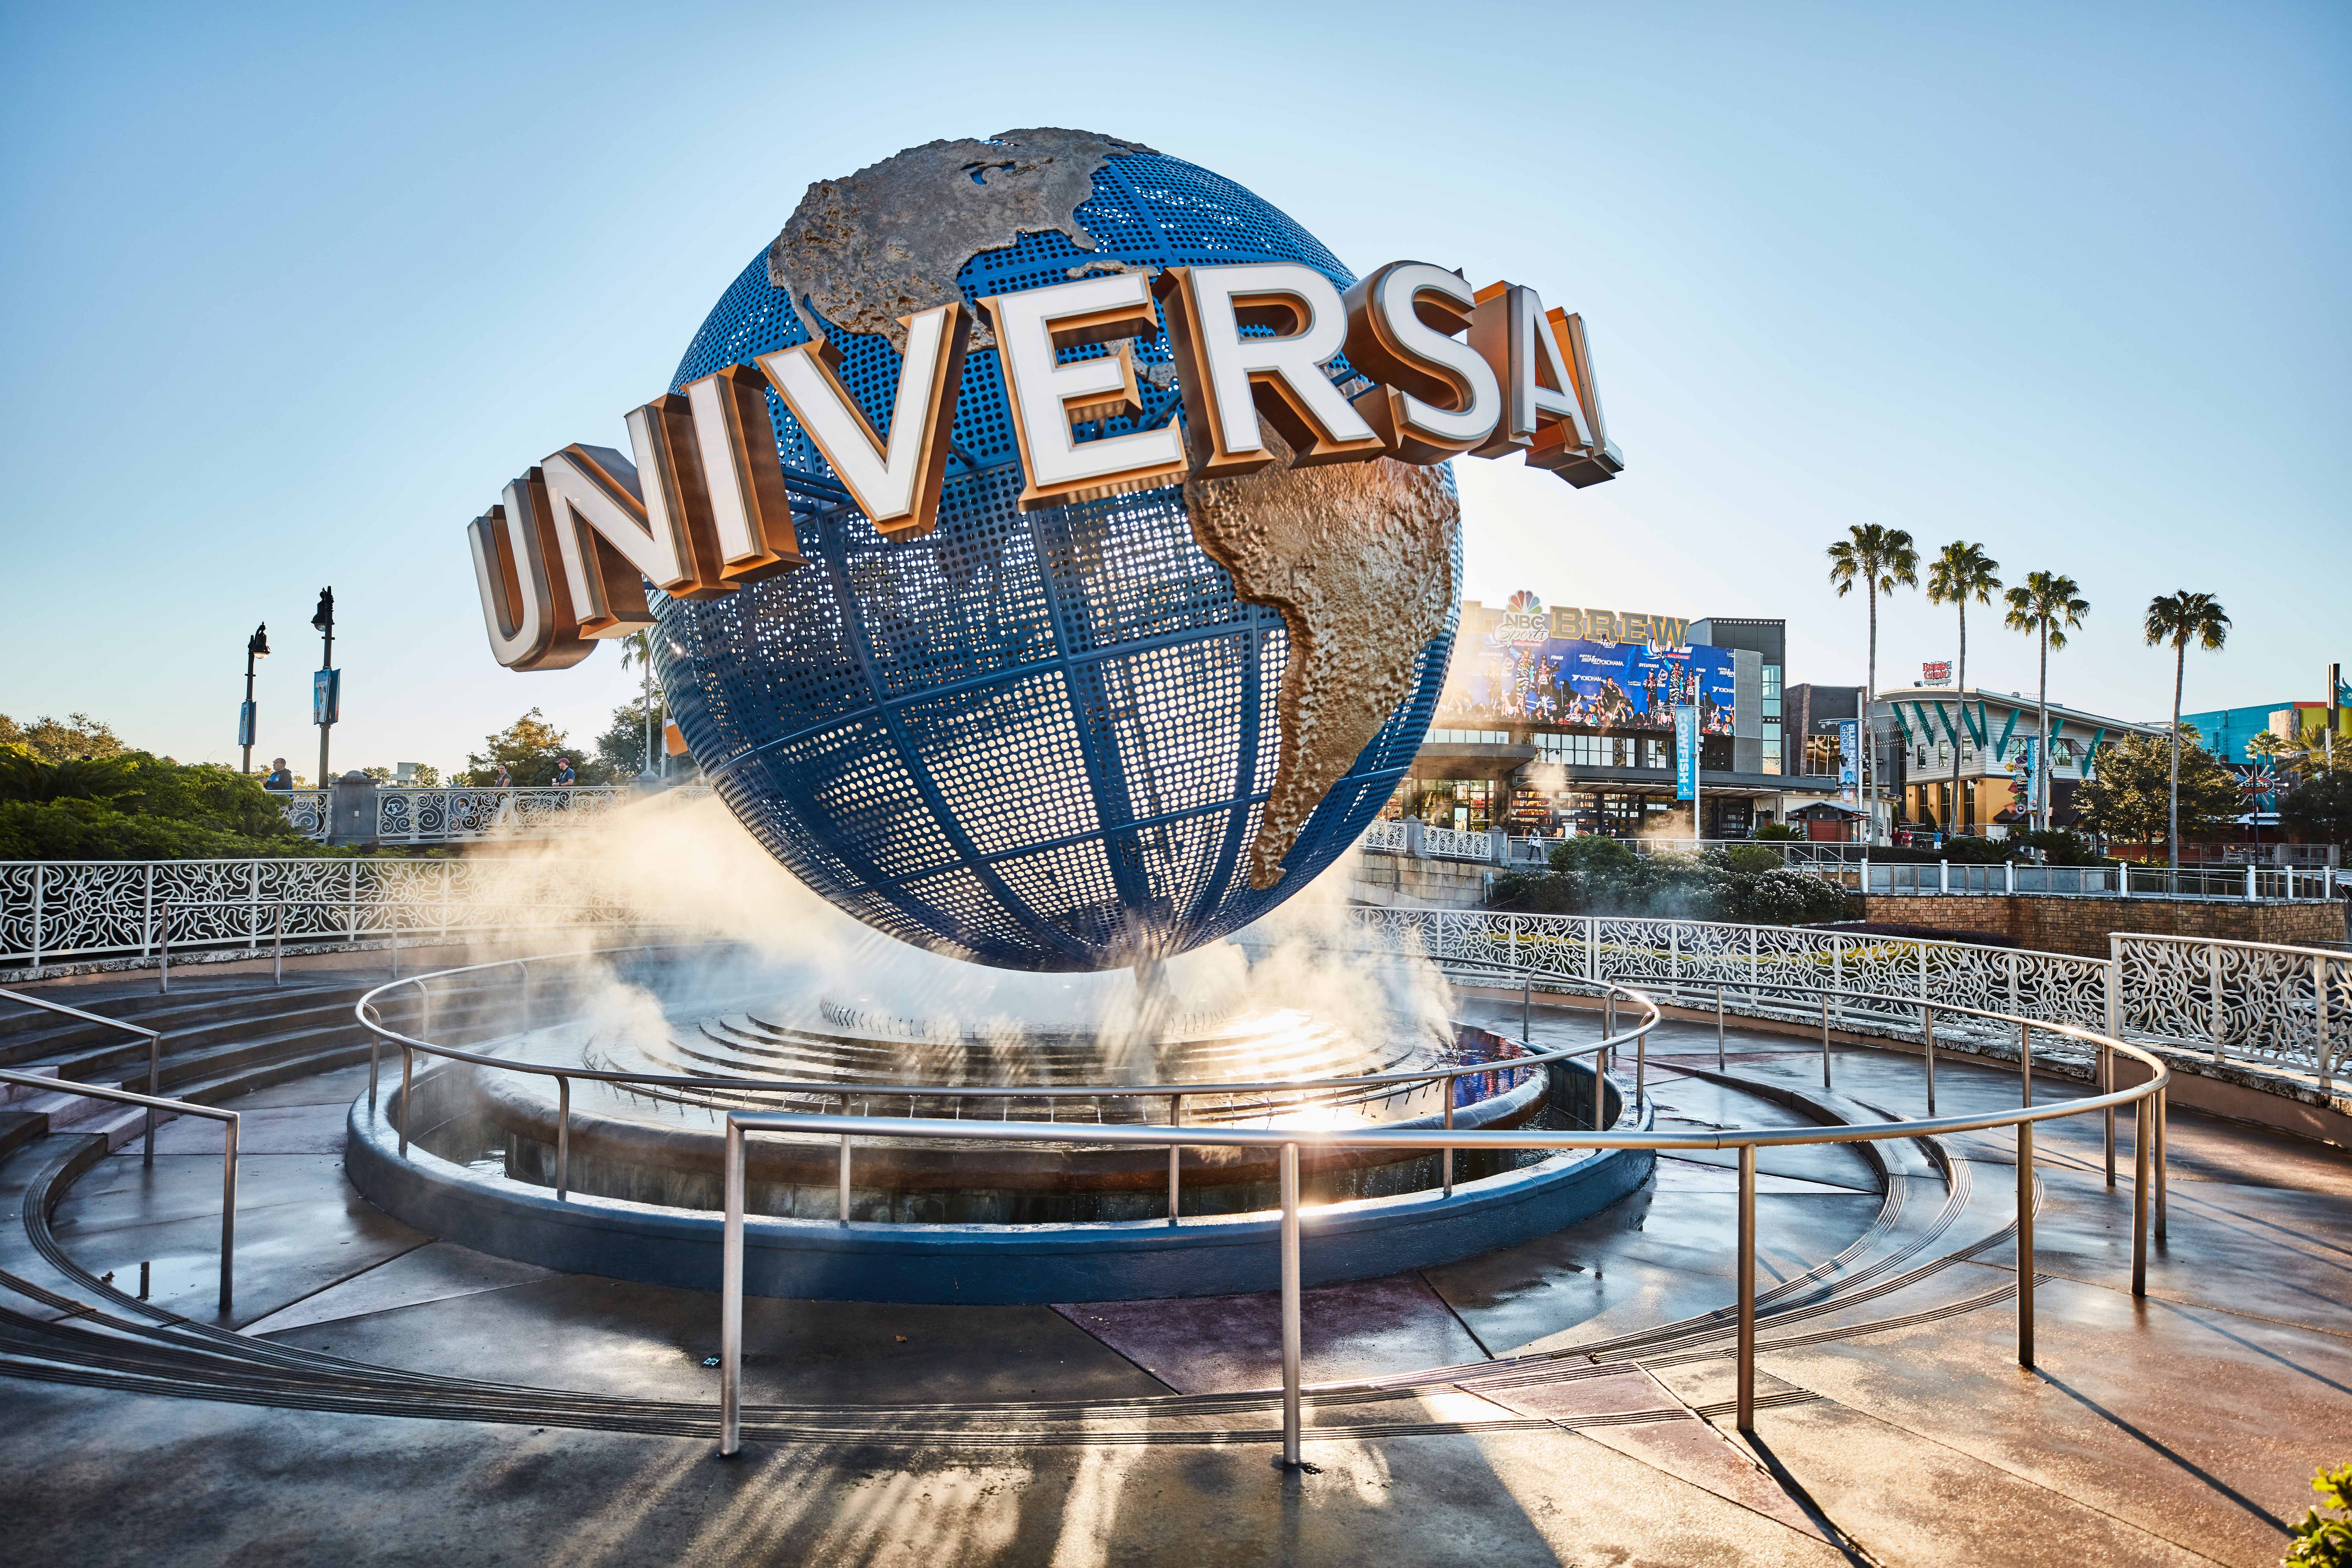 Universal Pictures